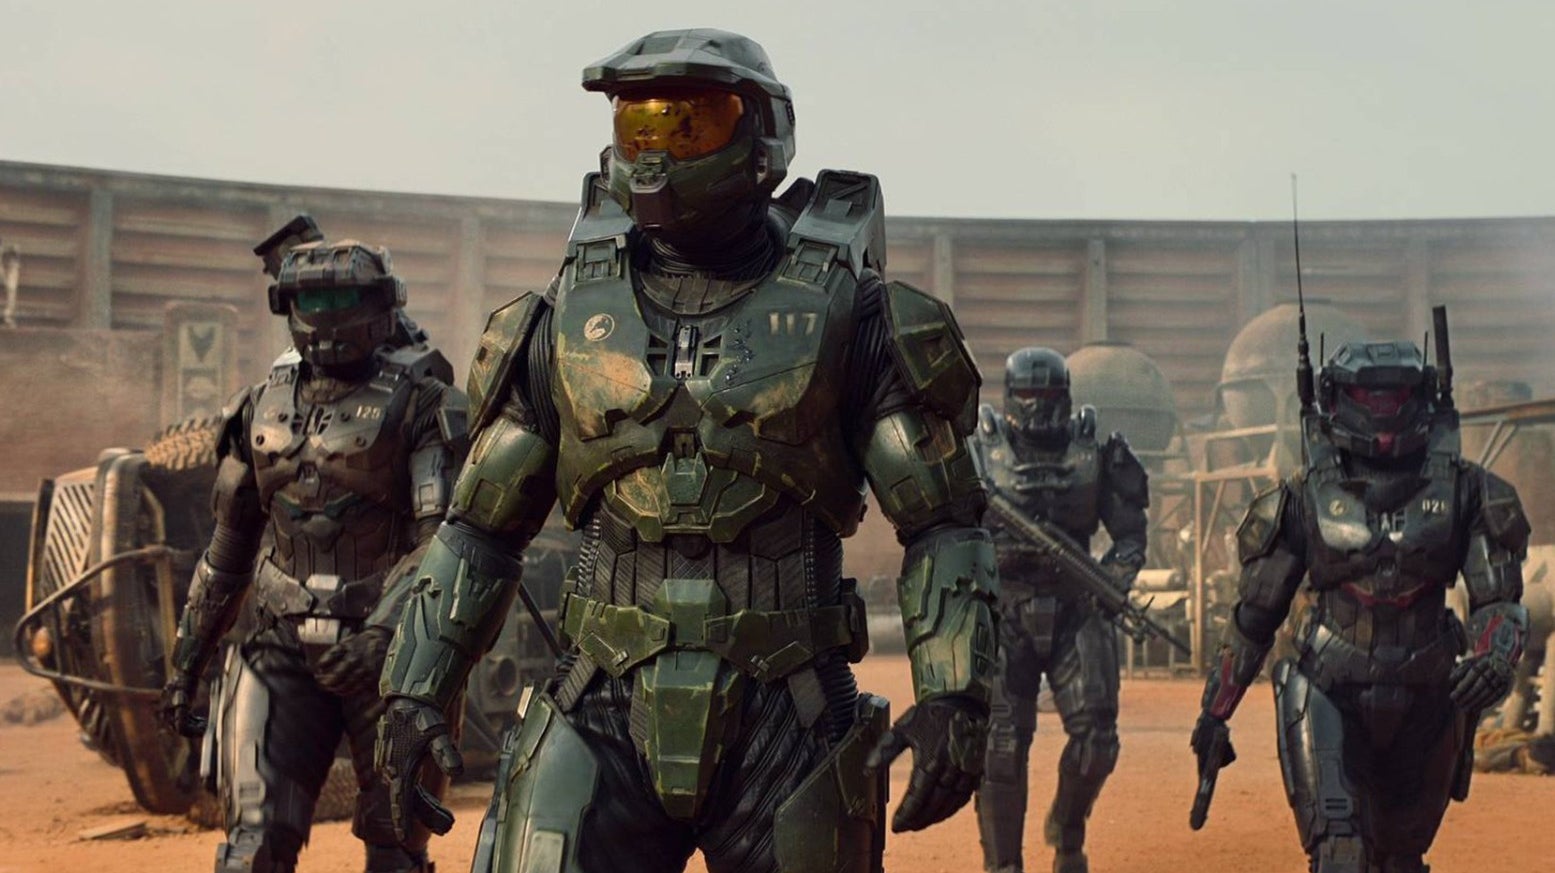 Image for Halo TV show getting second season on Paramount Plus